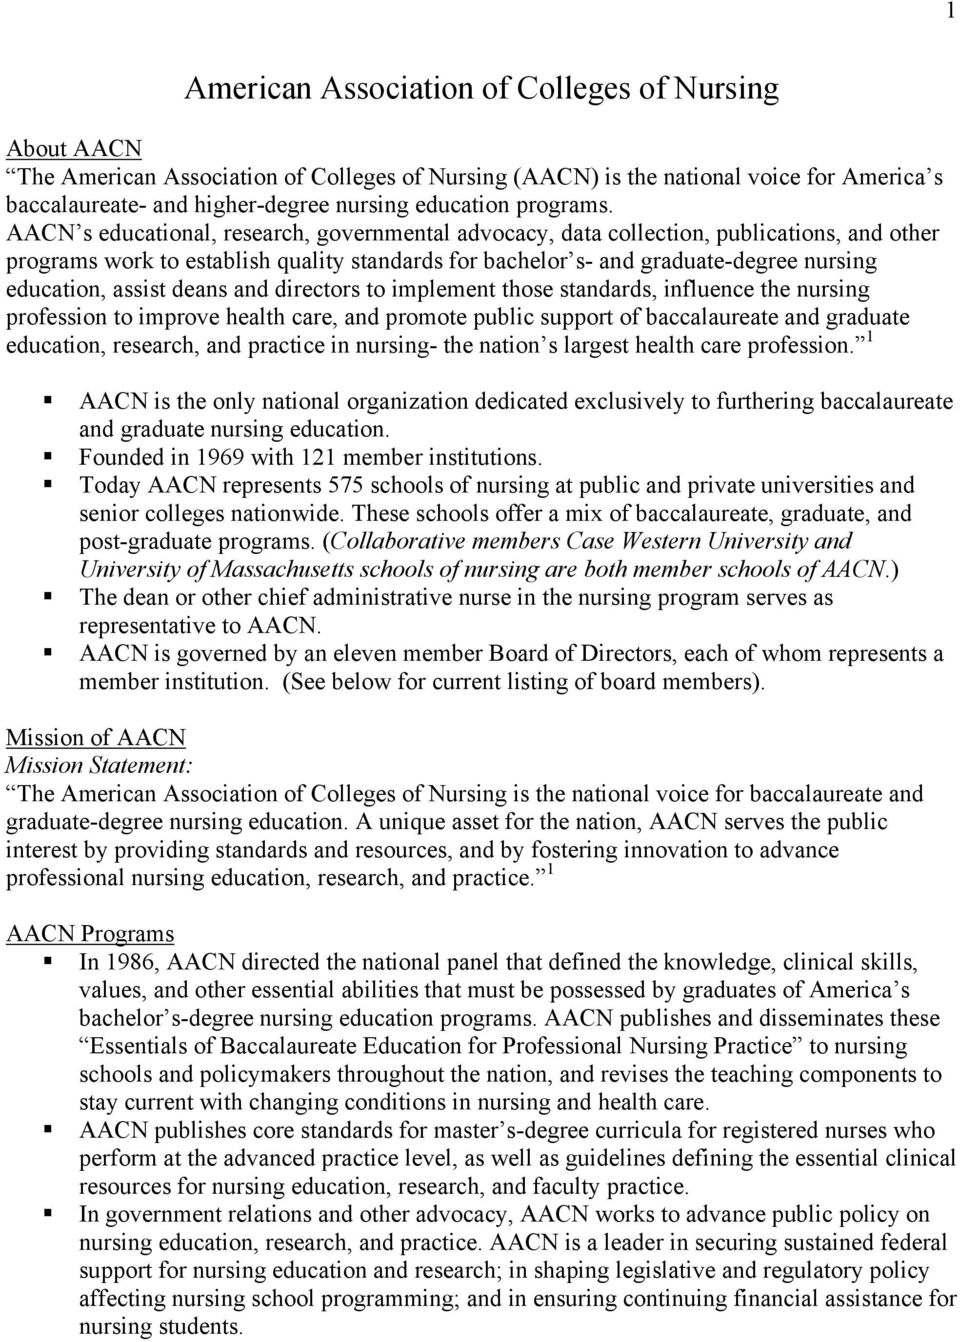 aacn mission statement